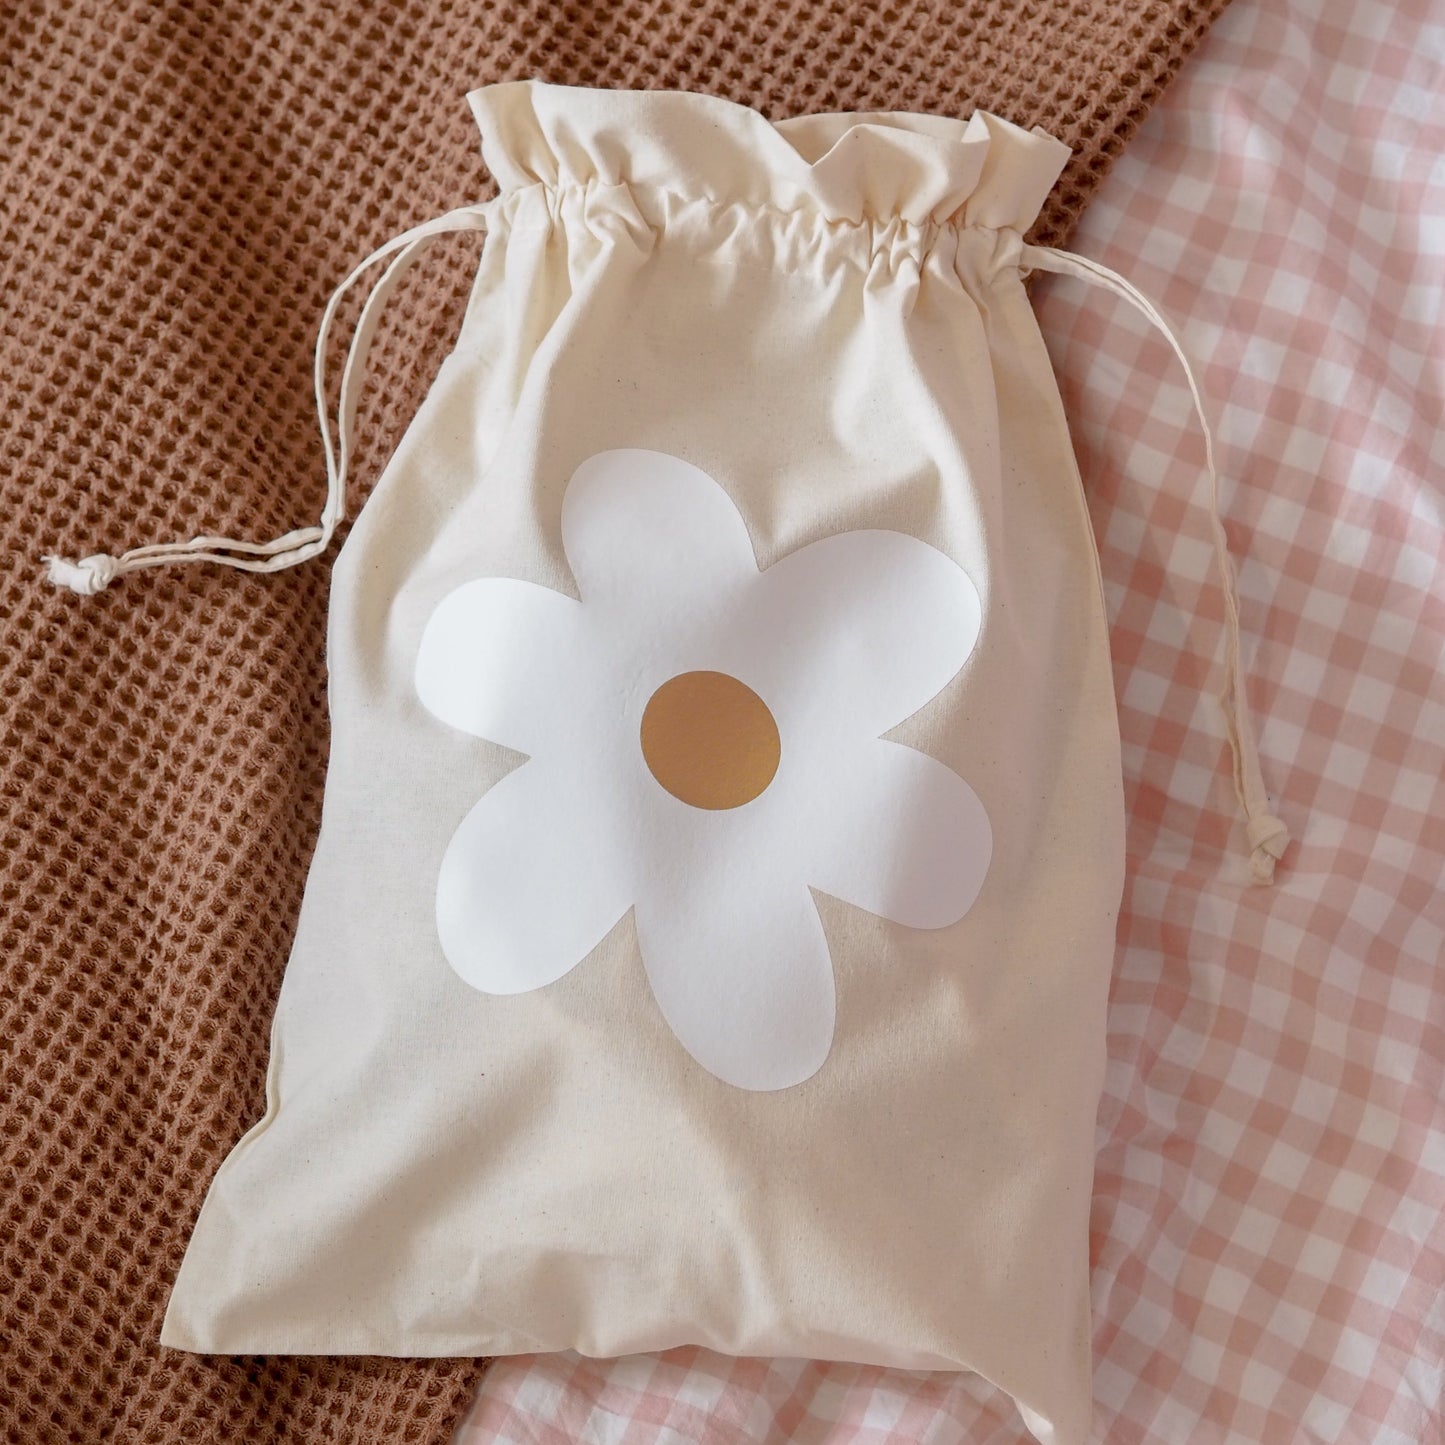 Daisy Bag - can be personalised